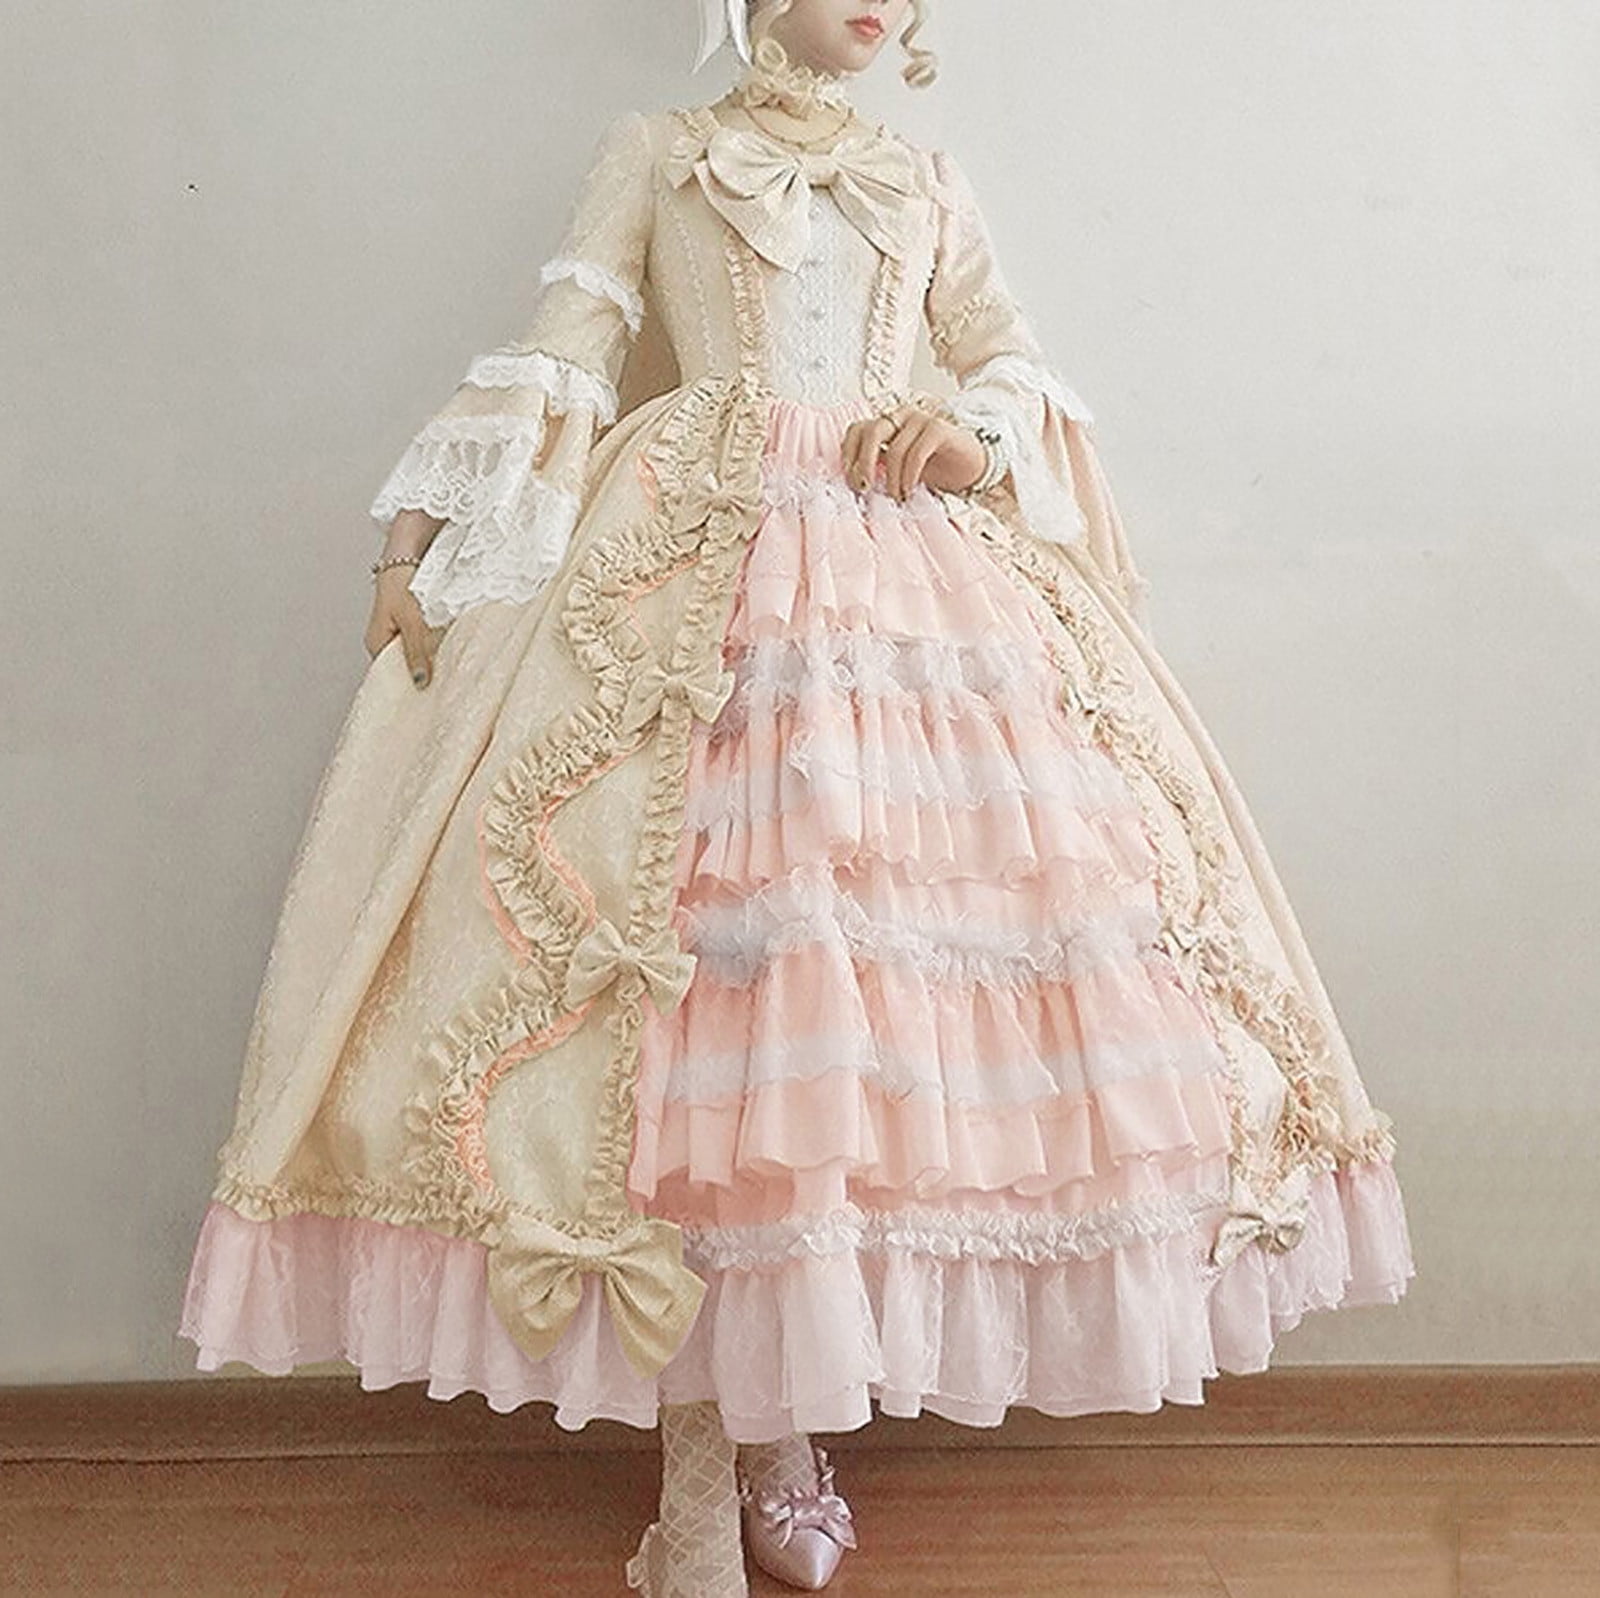 Quality Blush Pink Lace Princess Fashion Hollywood Flare Dress For Dolls 